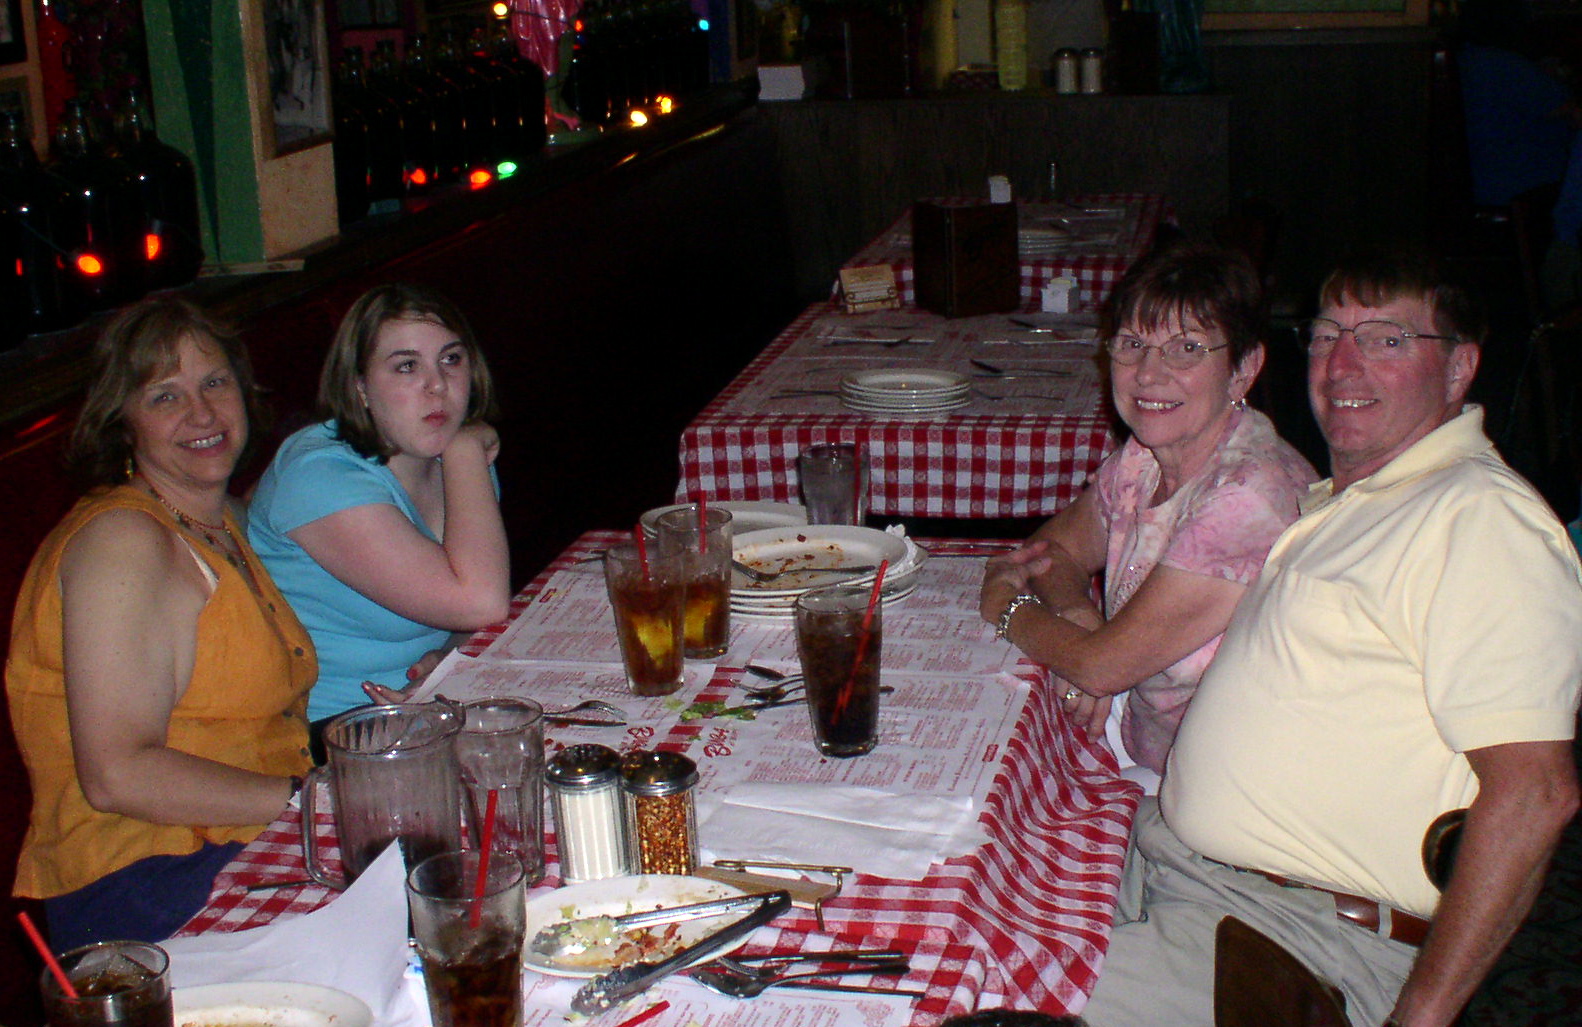 four people at a table with plates and drinking glasses